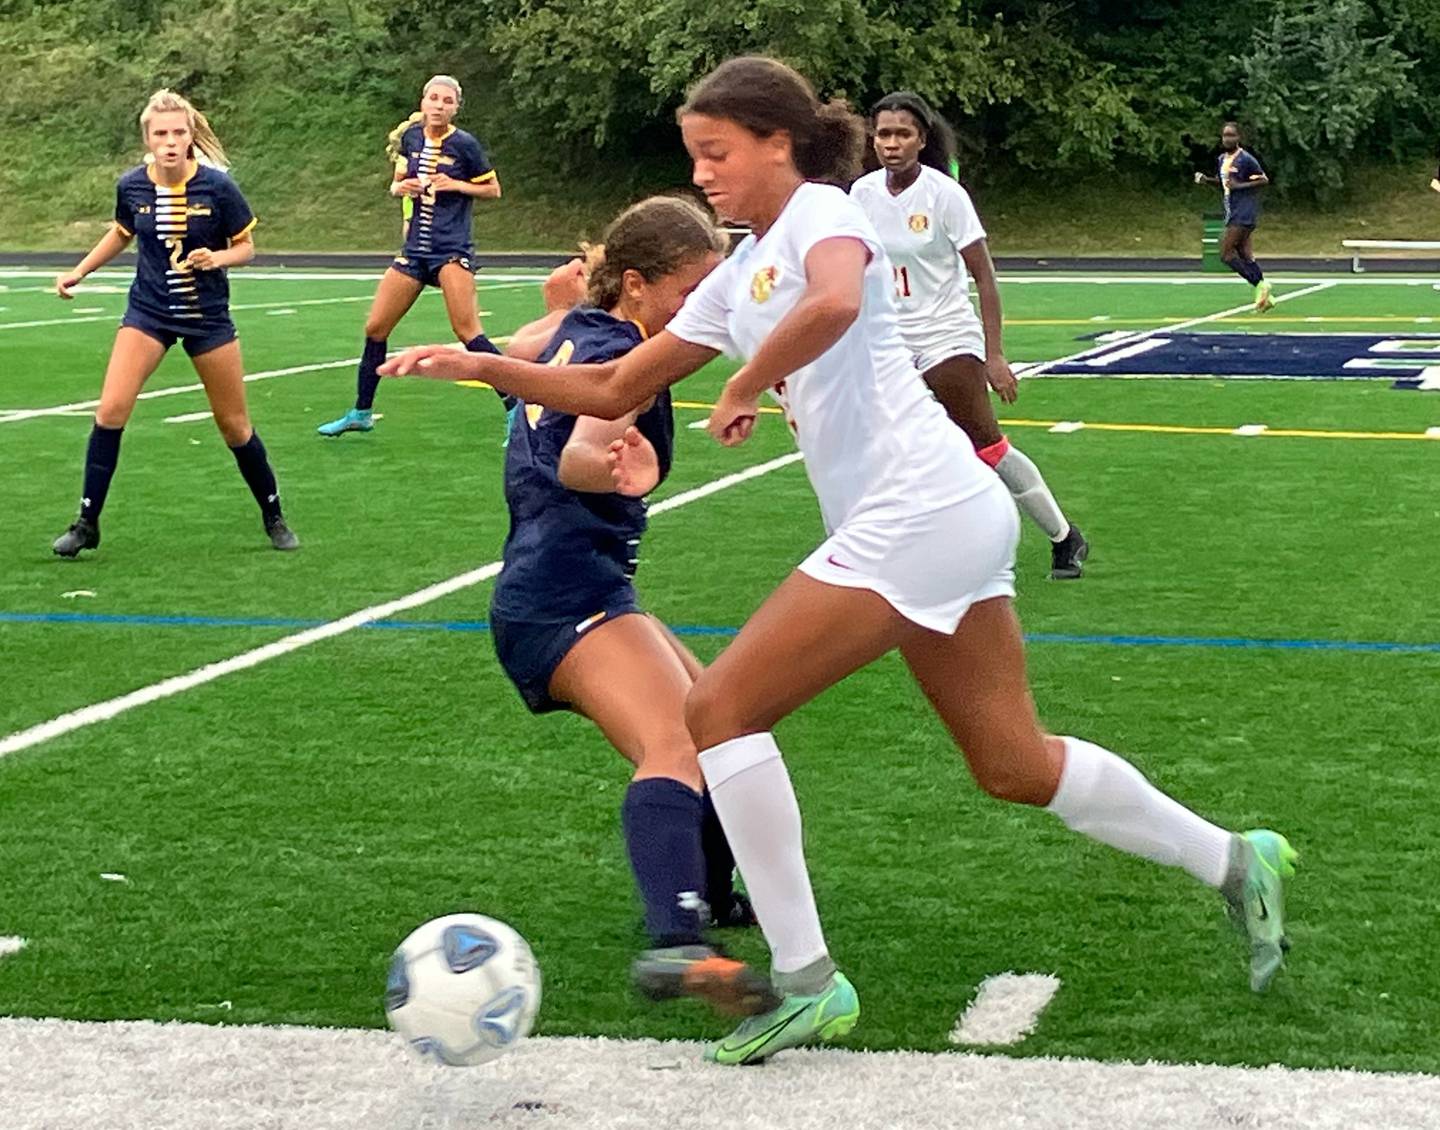 Hereford sophomore forward Aaliyah Stocks bolts up the sideline as Perry Hall senior midfielder Bridgette Asher defends in the 14th-ranked Gators’ 3-2 win on Tuesday.